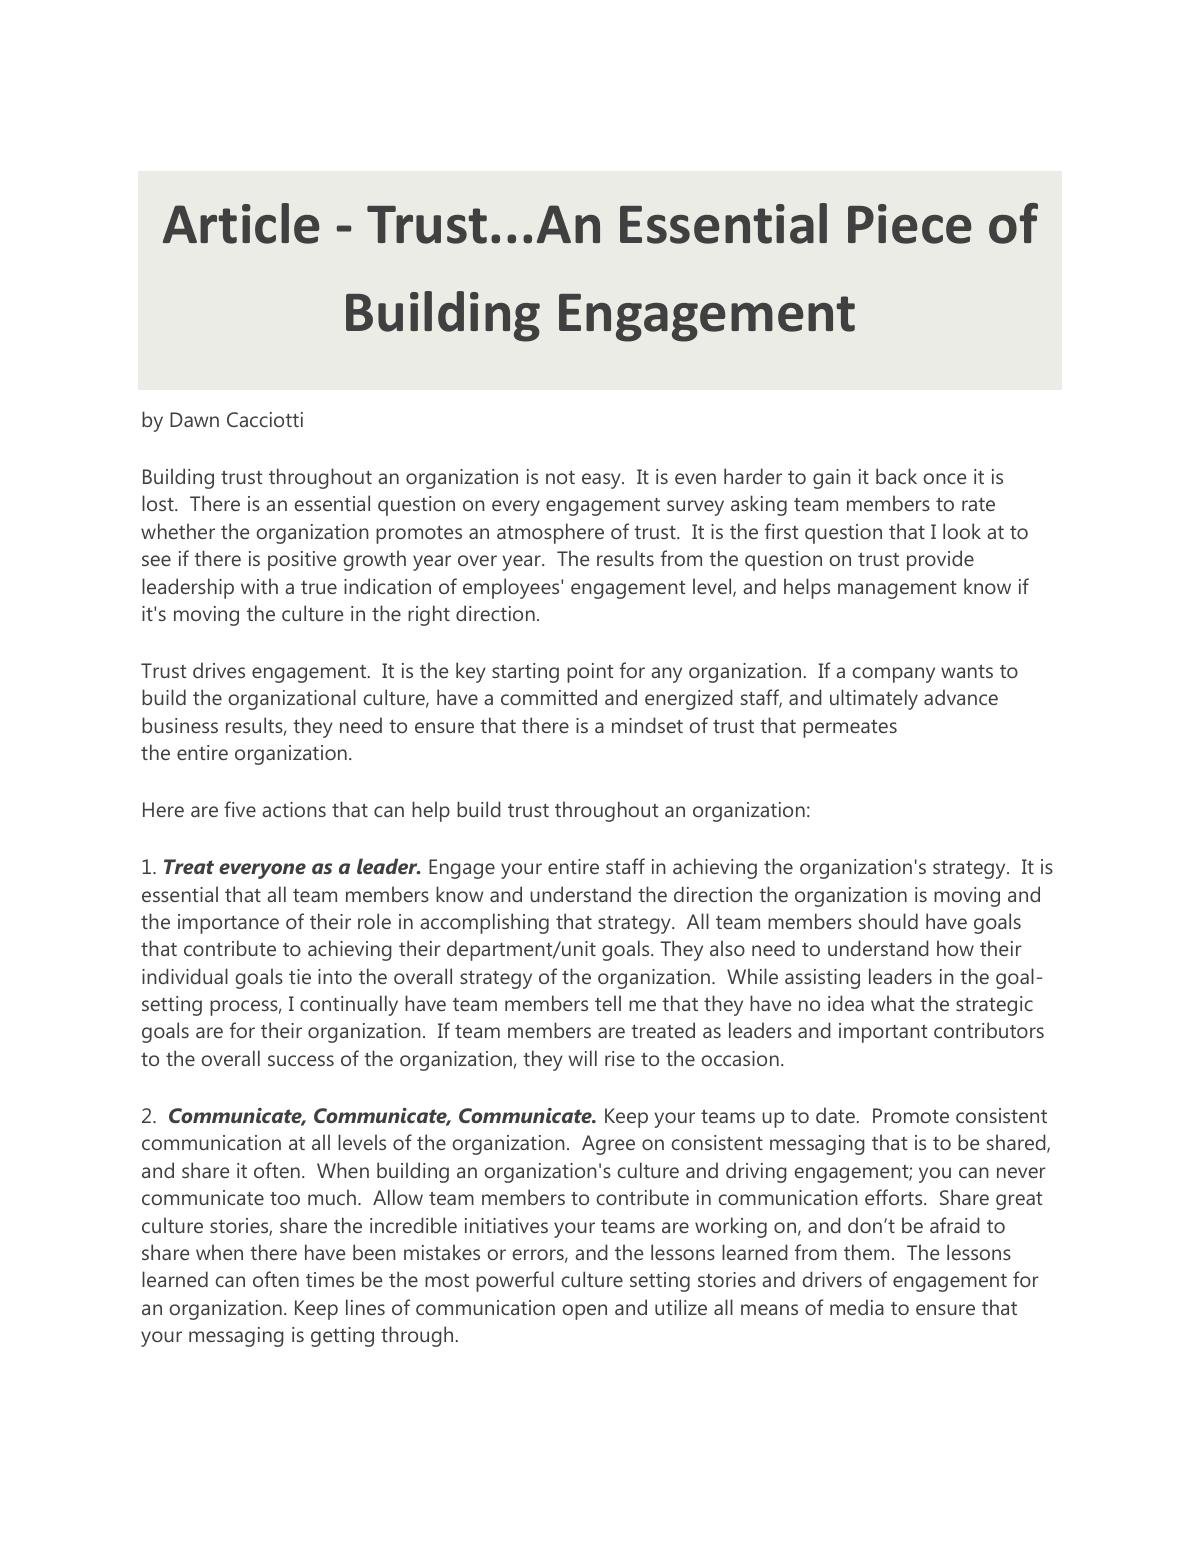 Trust...An Essential Piece of Building Engagement